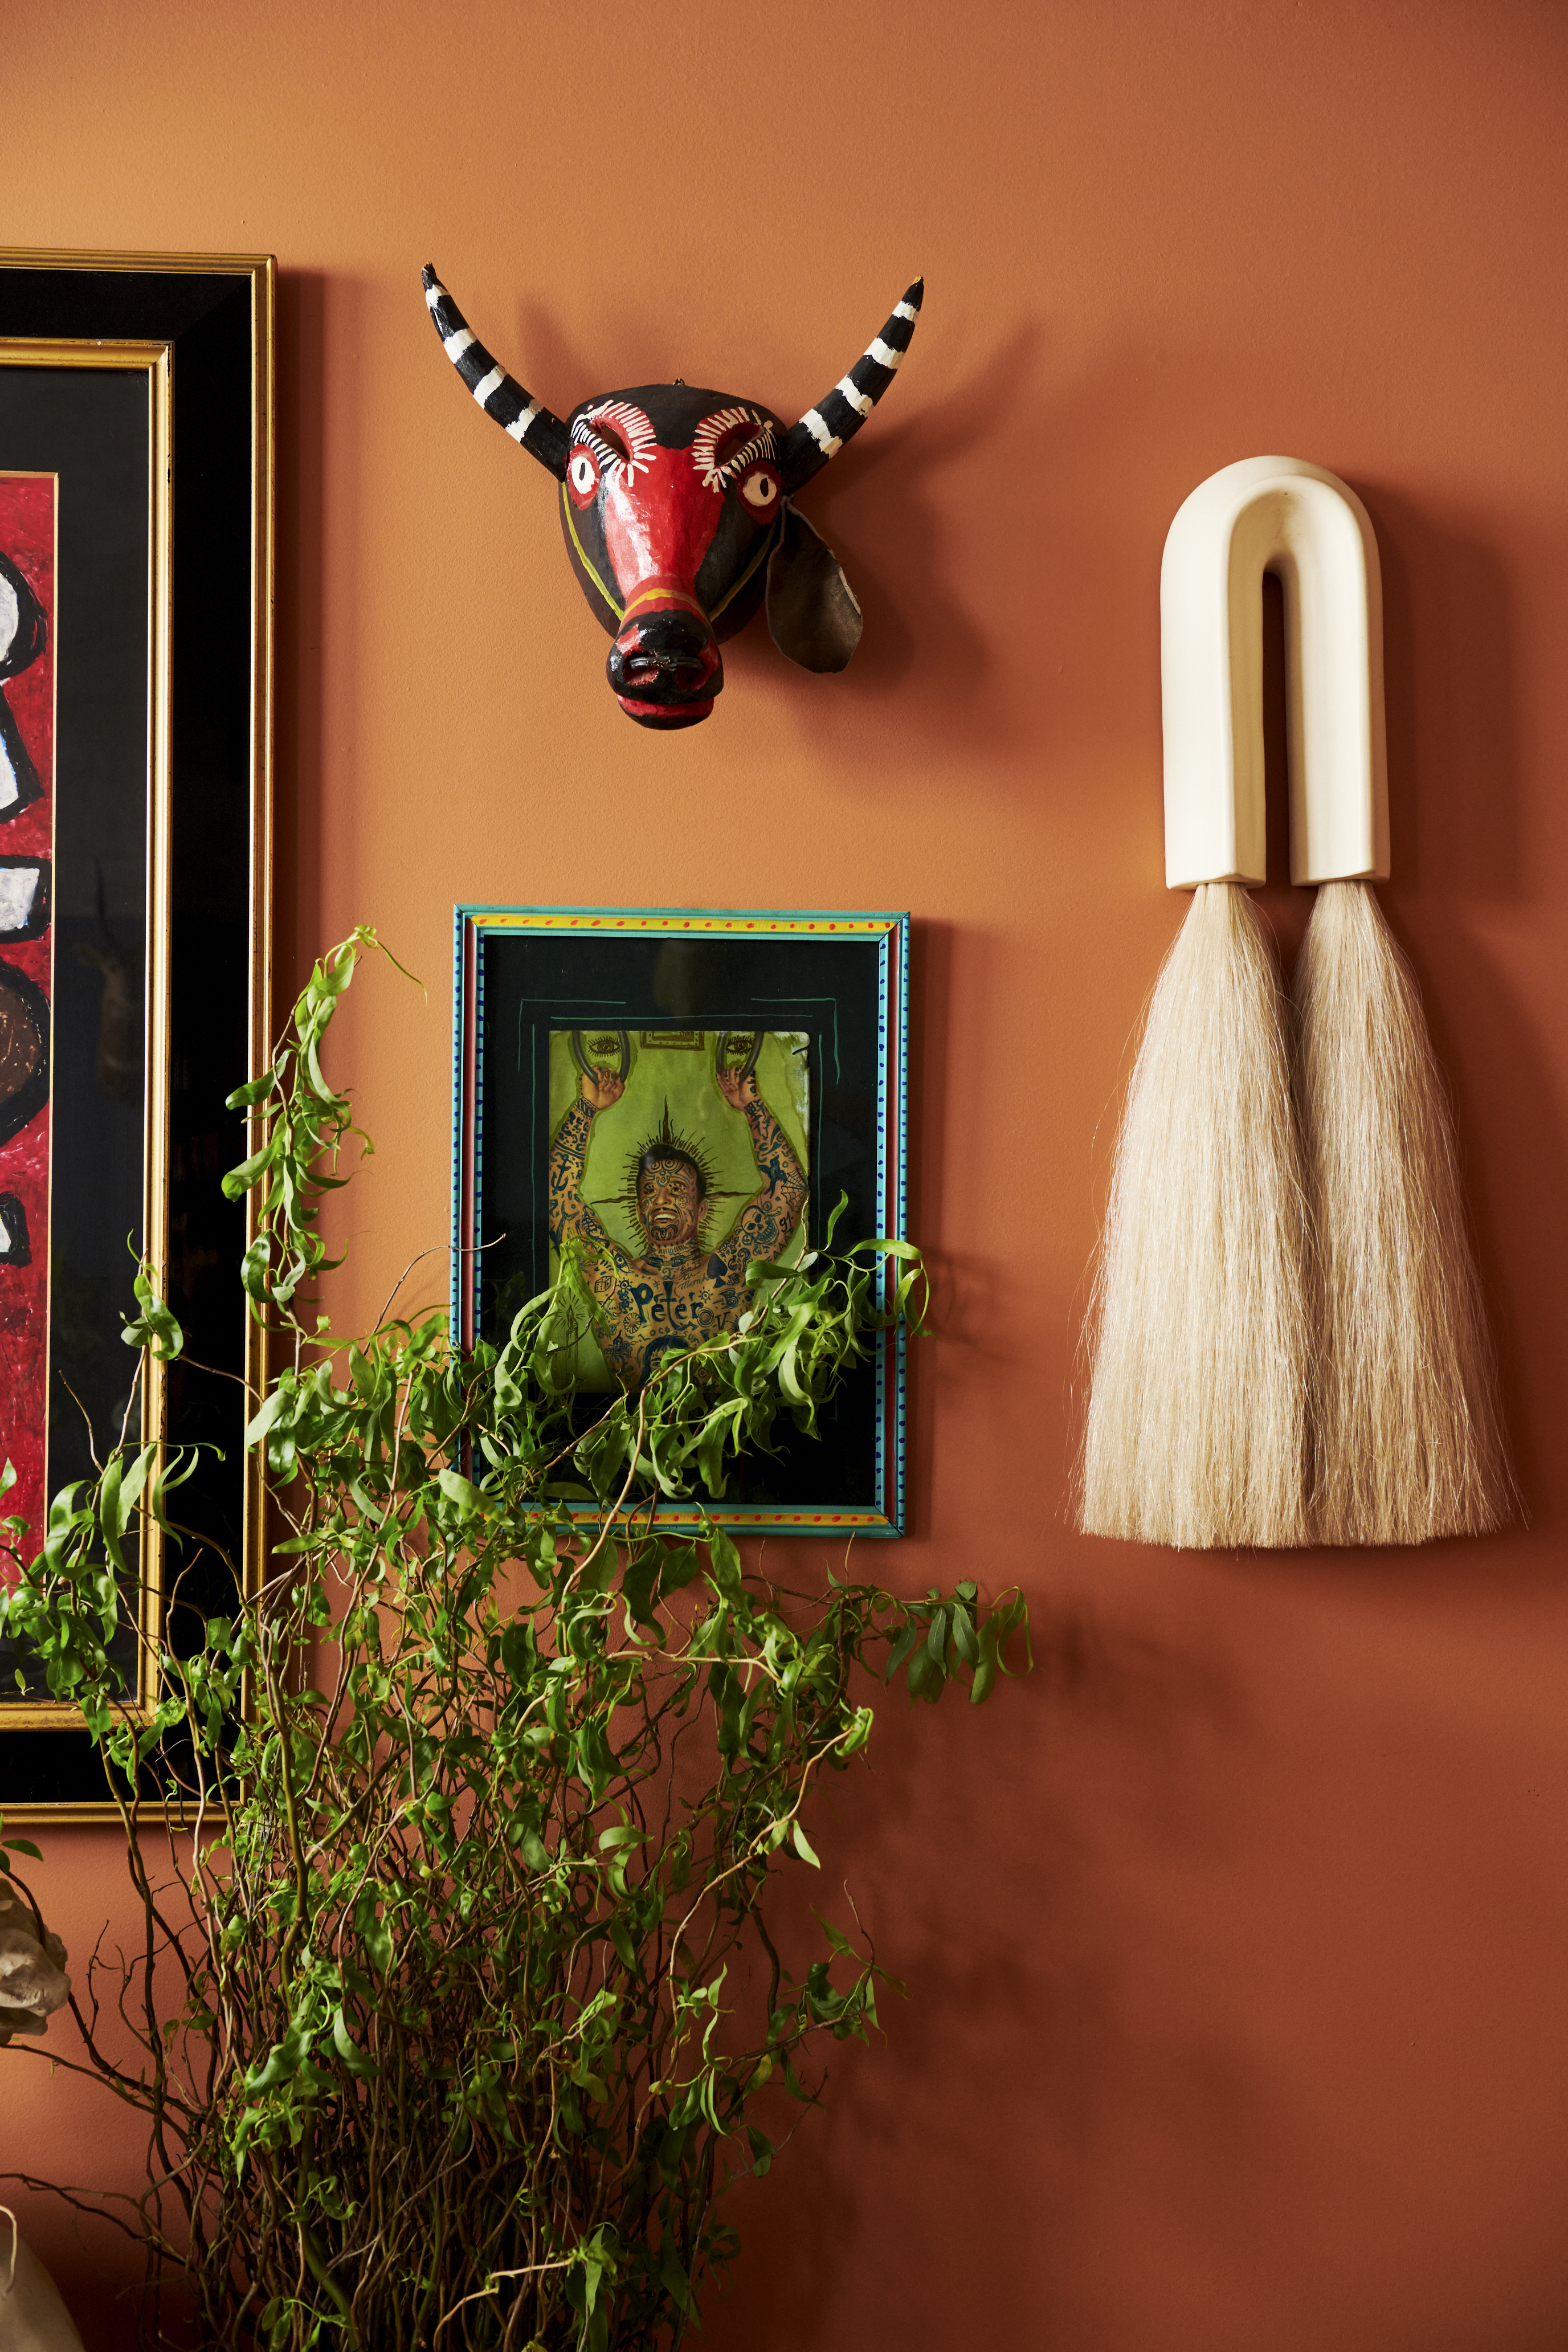 The image shows a warm orange wall adorned with a red and black bull mask, a framed artwork, and a decorative piece with blonde tassels. A lush green plant sits below.